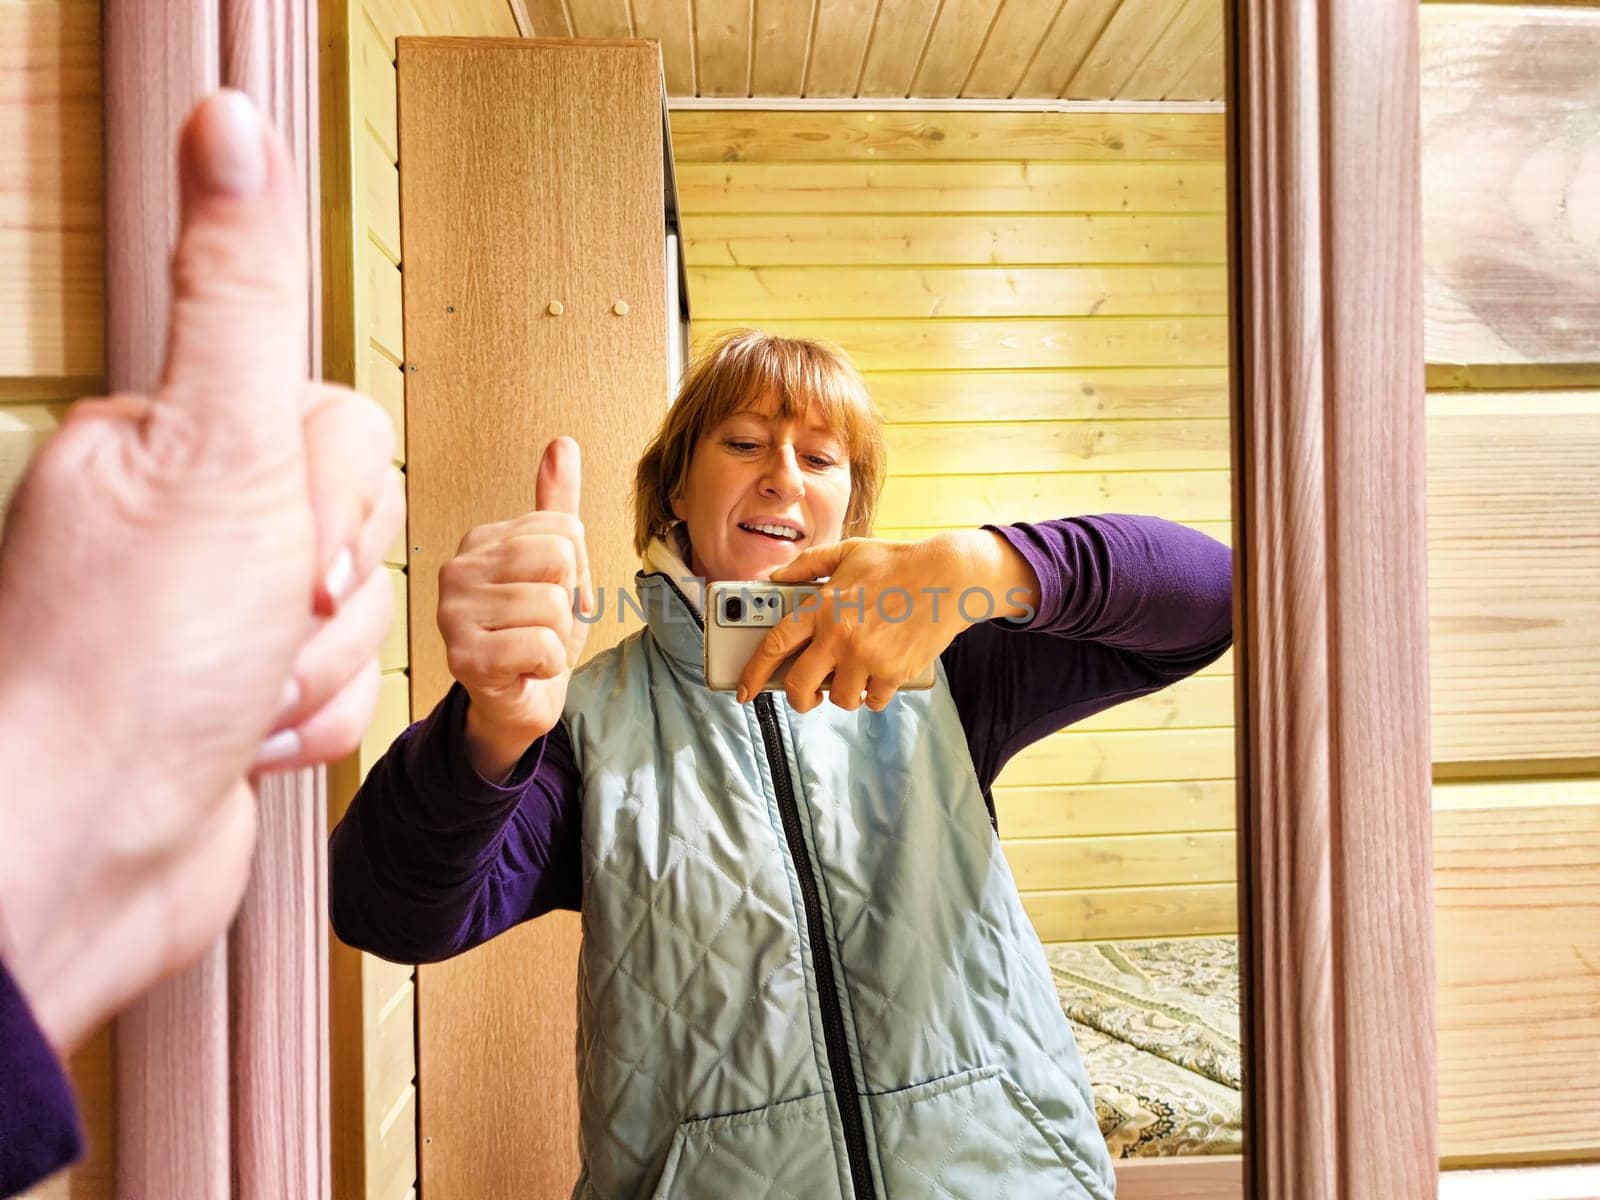 Middle-aged woman using smartphone for selfie and blogging. Female blogger poses in a photo. The girl admires herself in the mirror